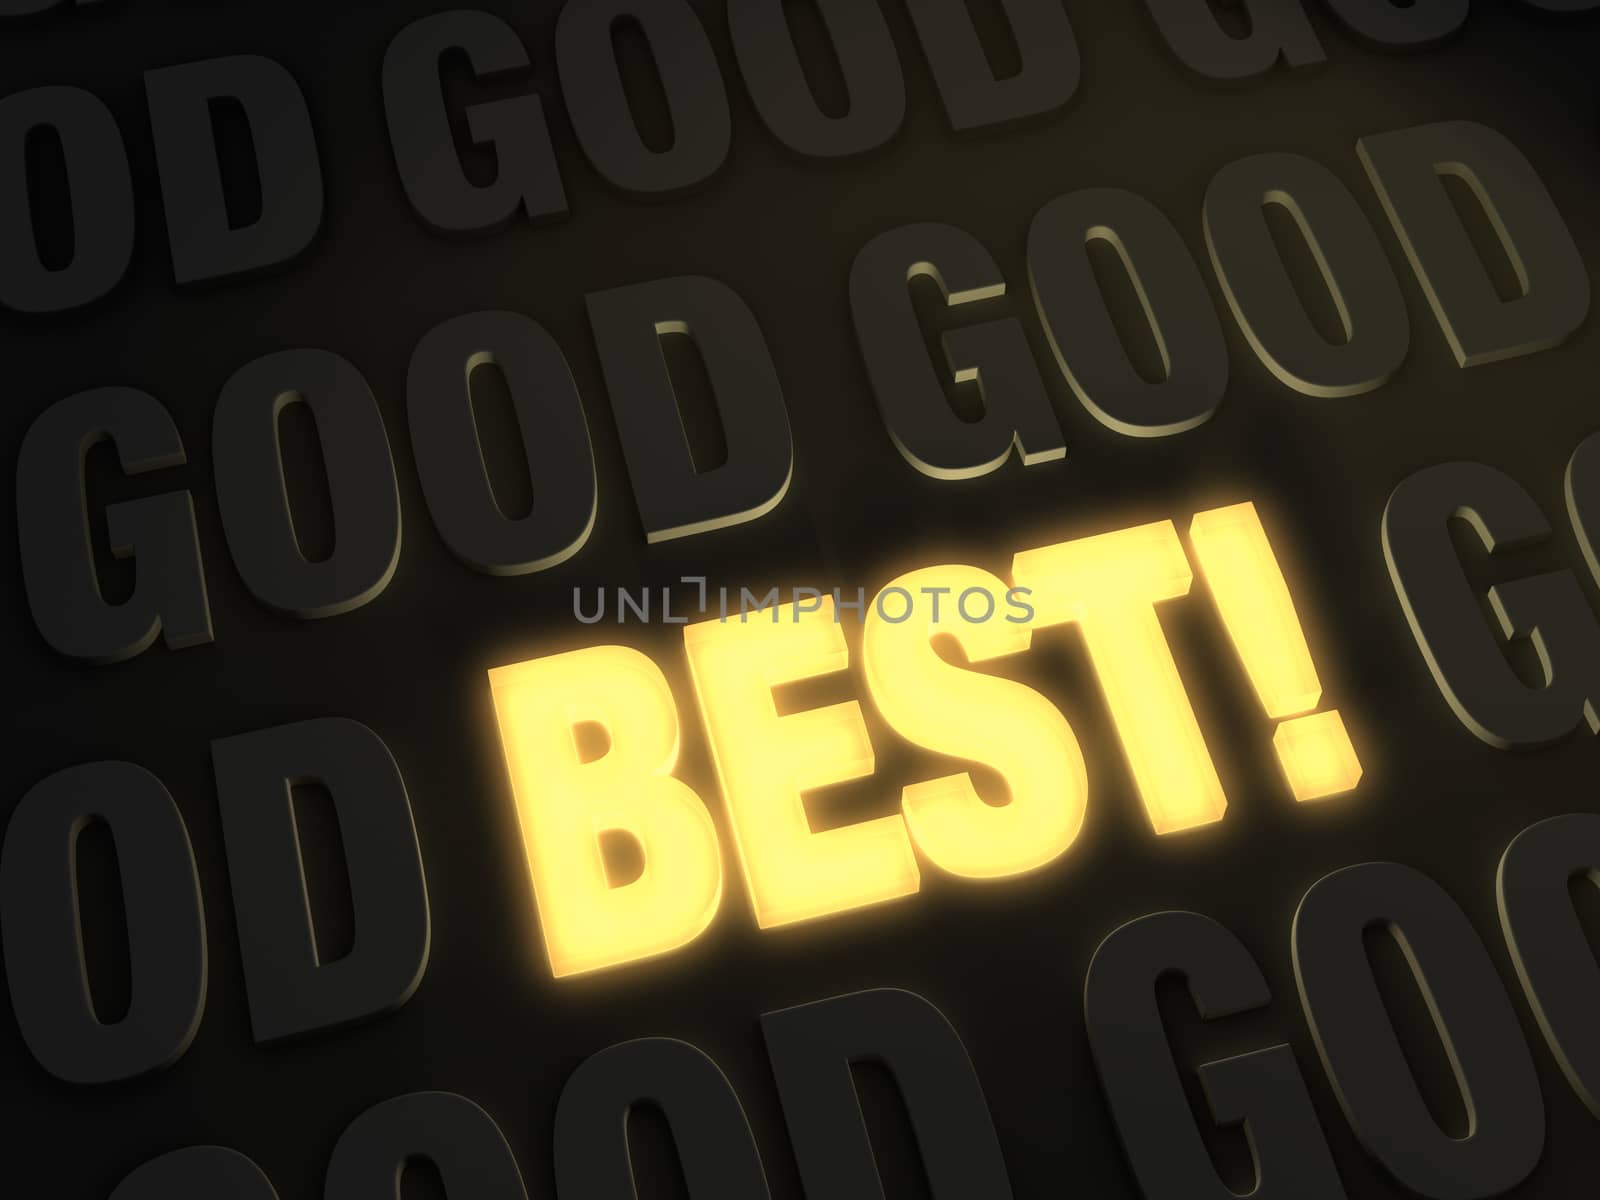 Best Over Good by Em3